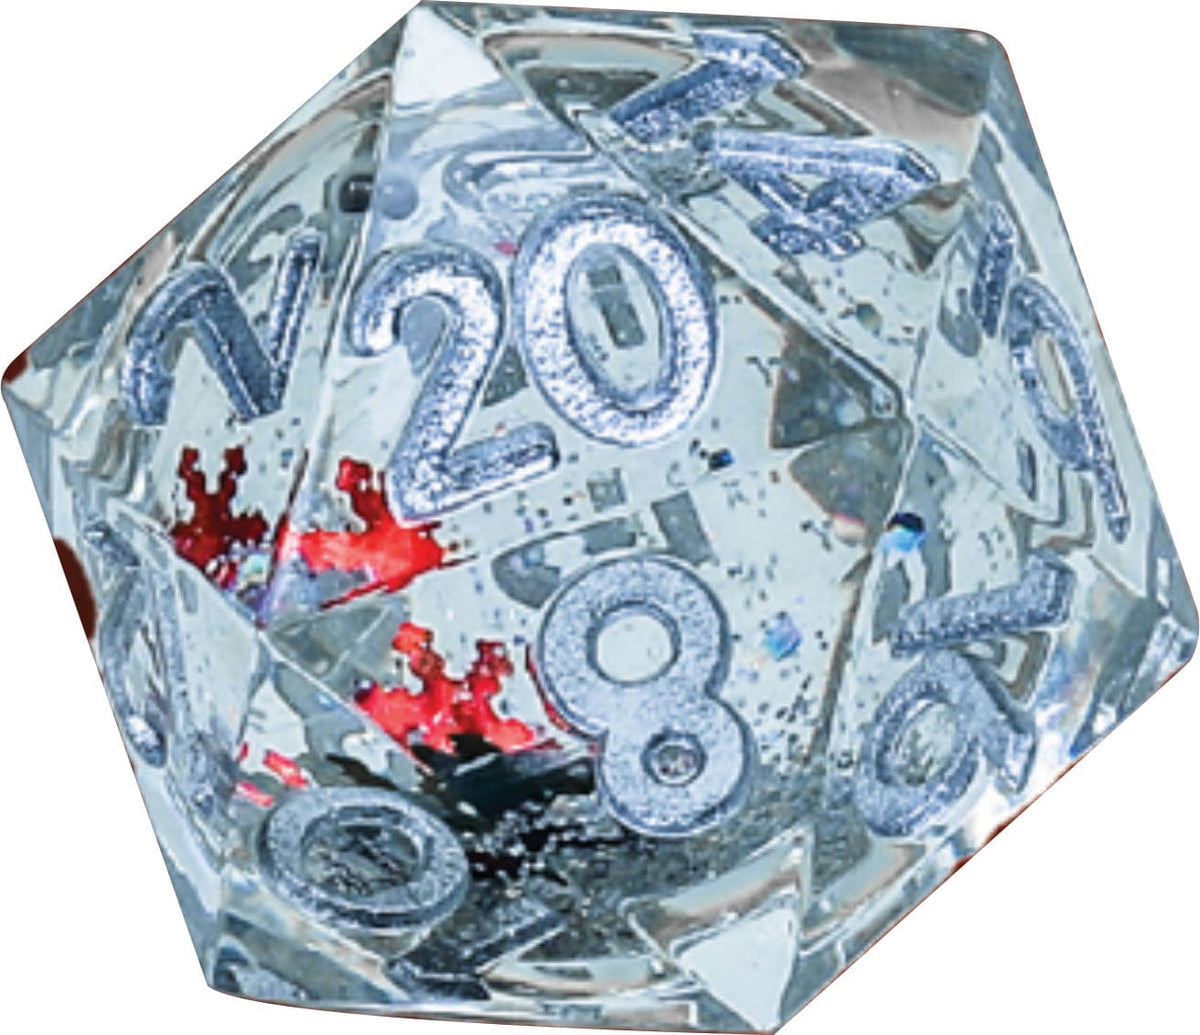 Sirius: 22mm Sharp D20 - Snow Globe, Silver Ink, Silver Glitter, Silver Green and Red Snowflakes